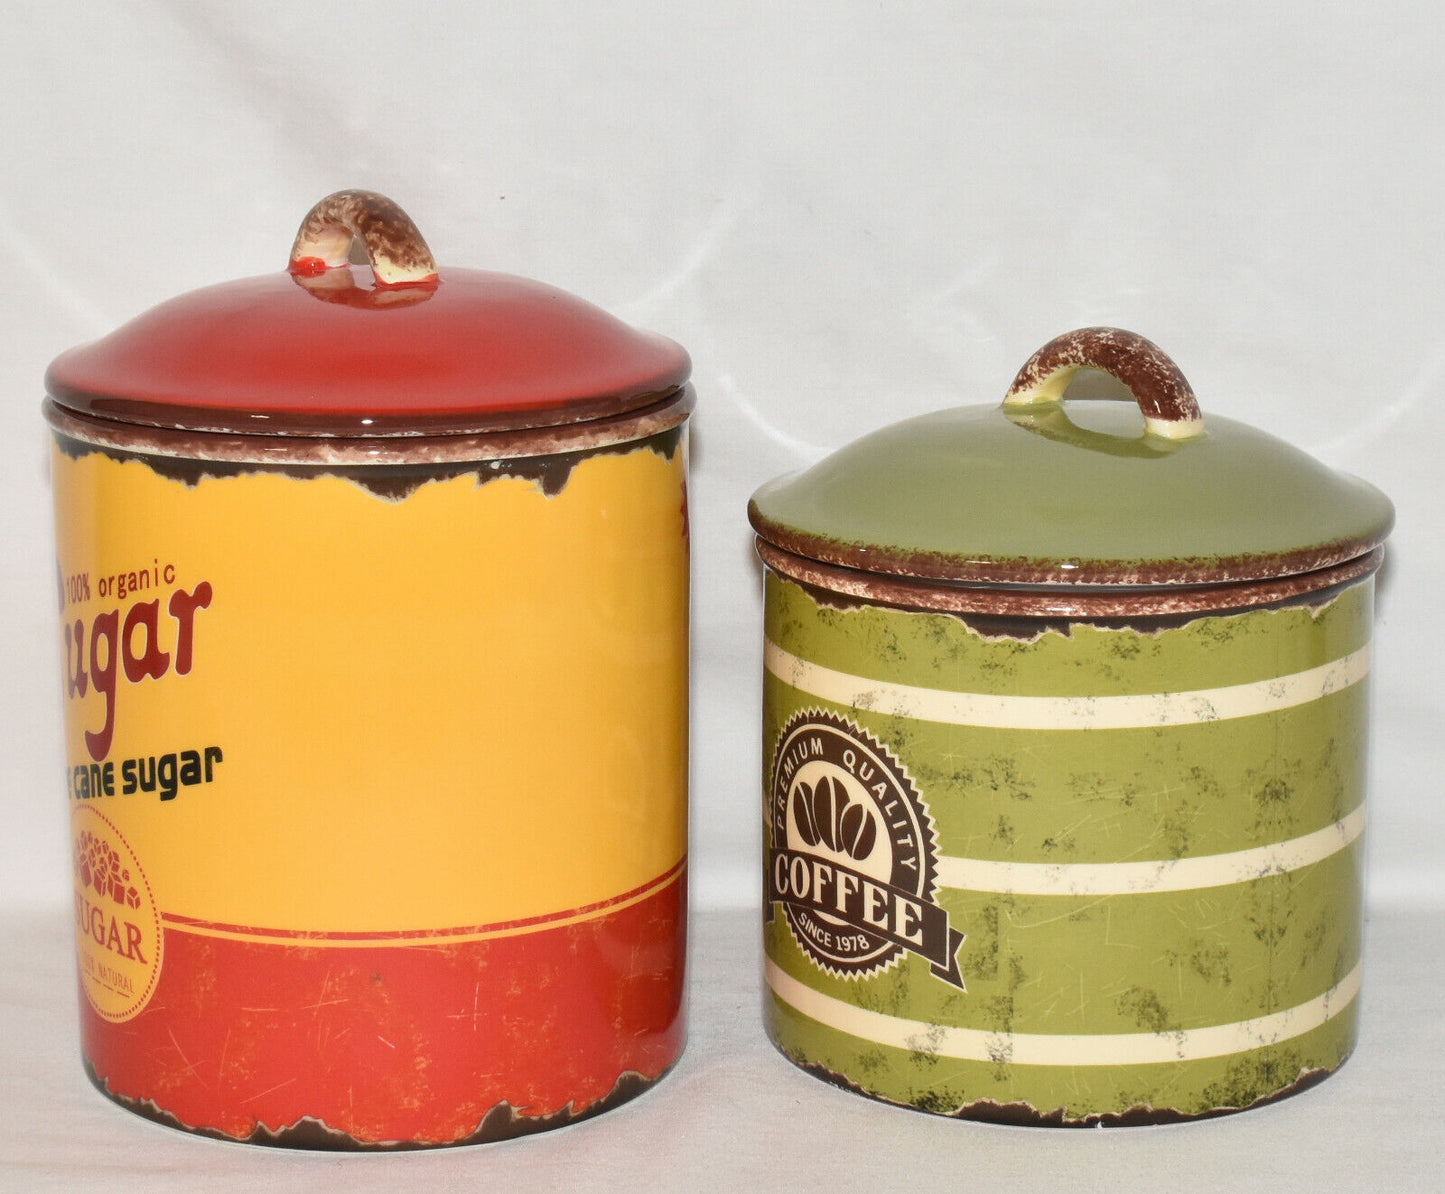 2pc Set Retro Canisters Sugar Coffee Ceramic Canisters w/ Vintage Graphics New